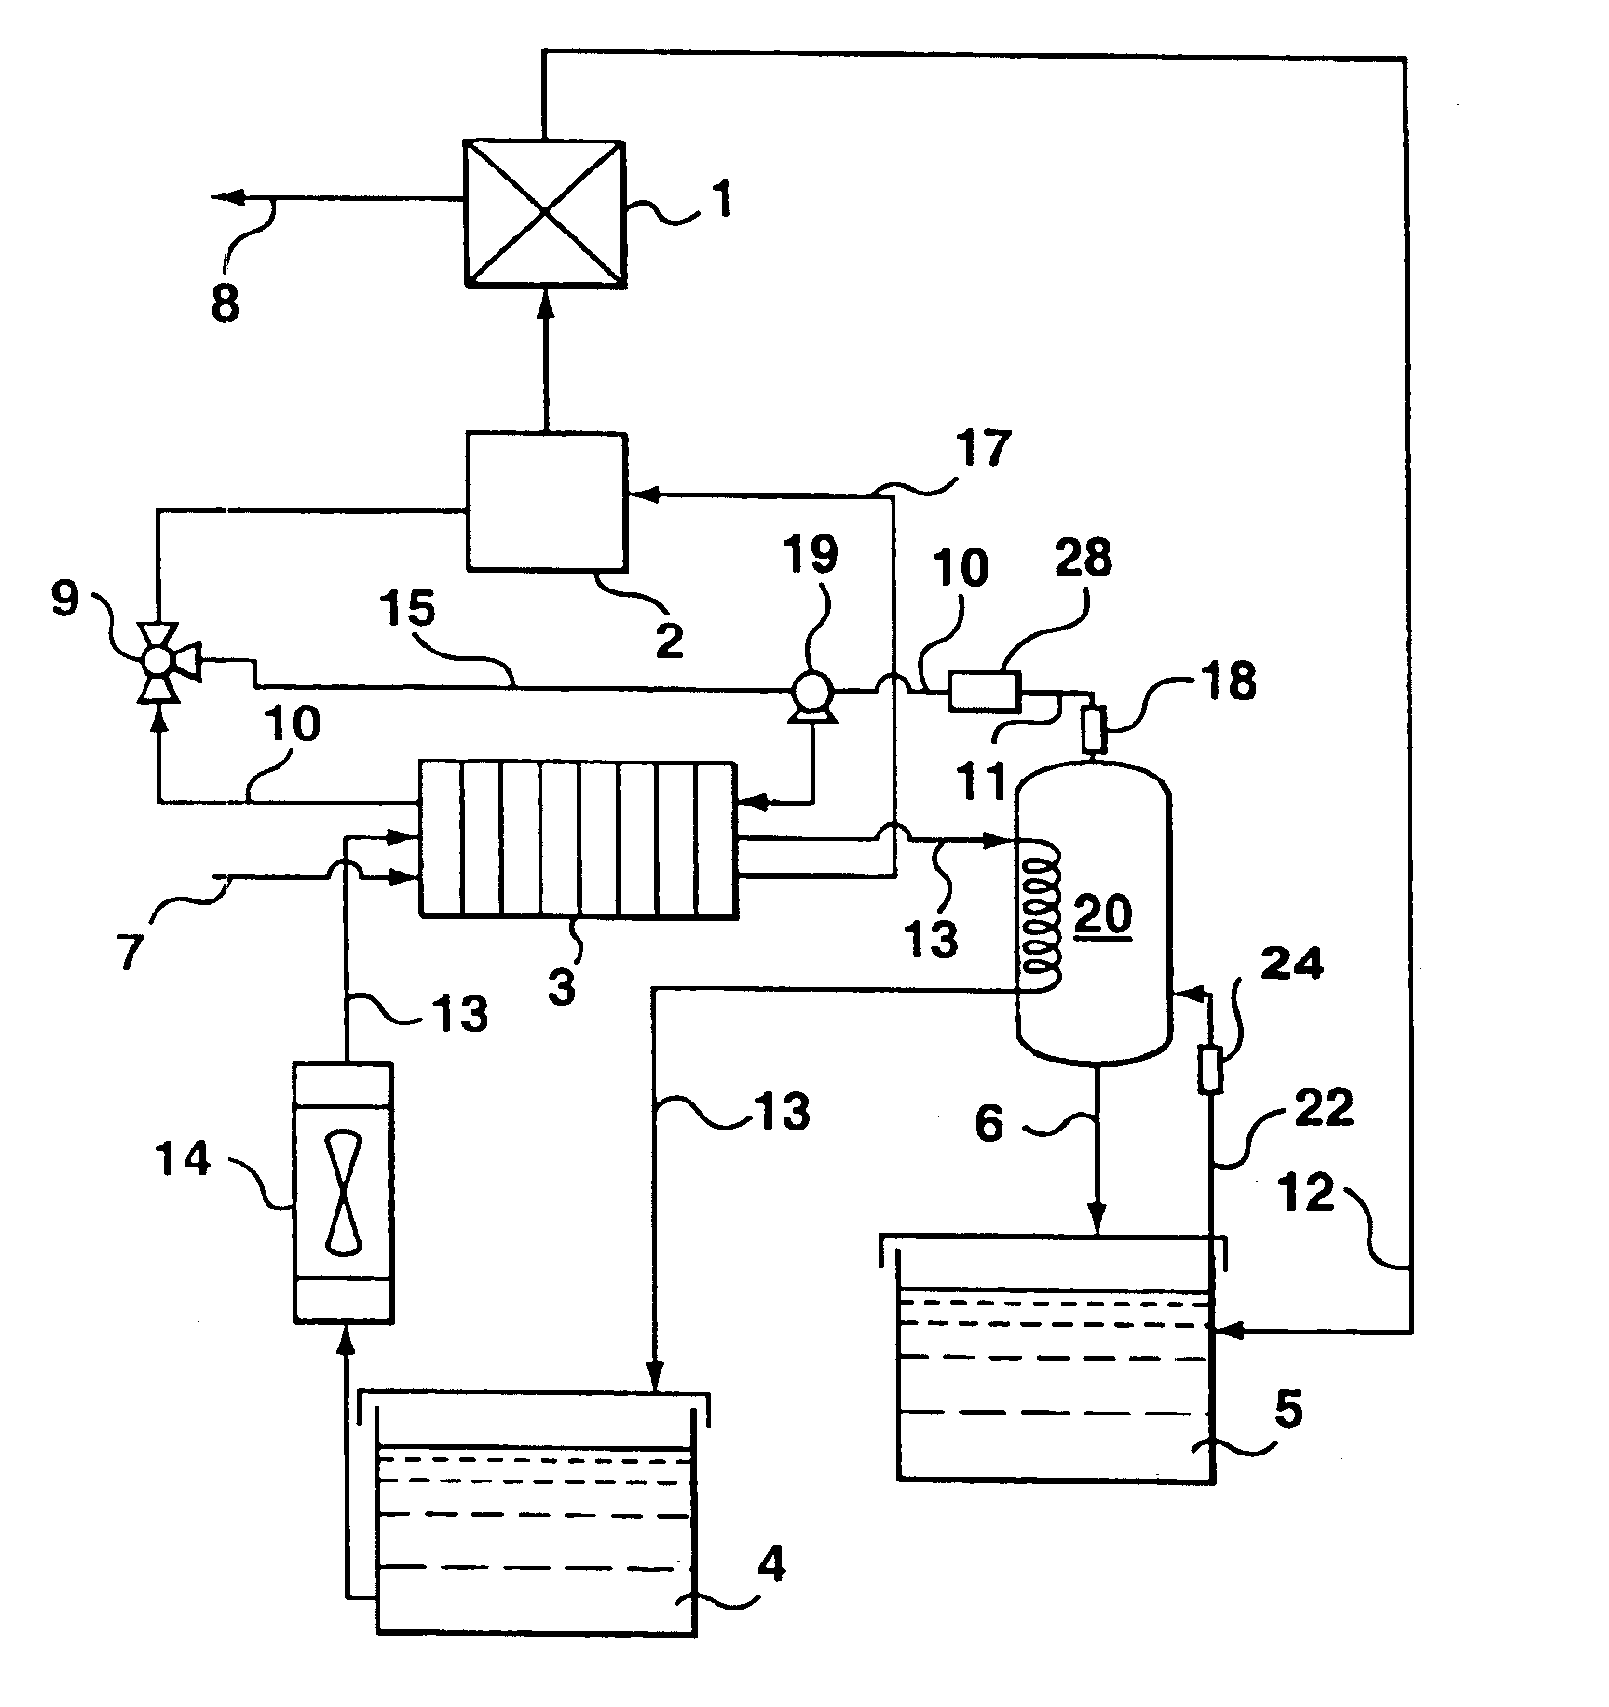 Chemical hydride hydrogen generation system and fuel cell stack incorporating a common heat transfer circuit